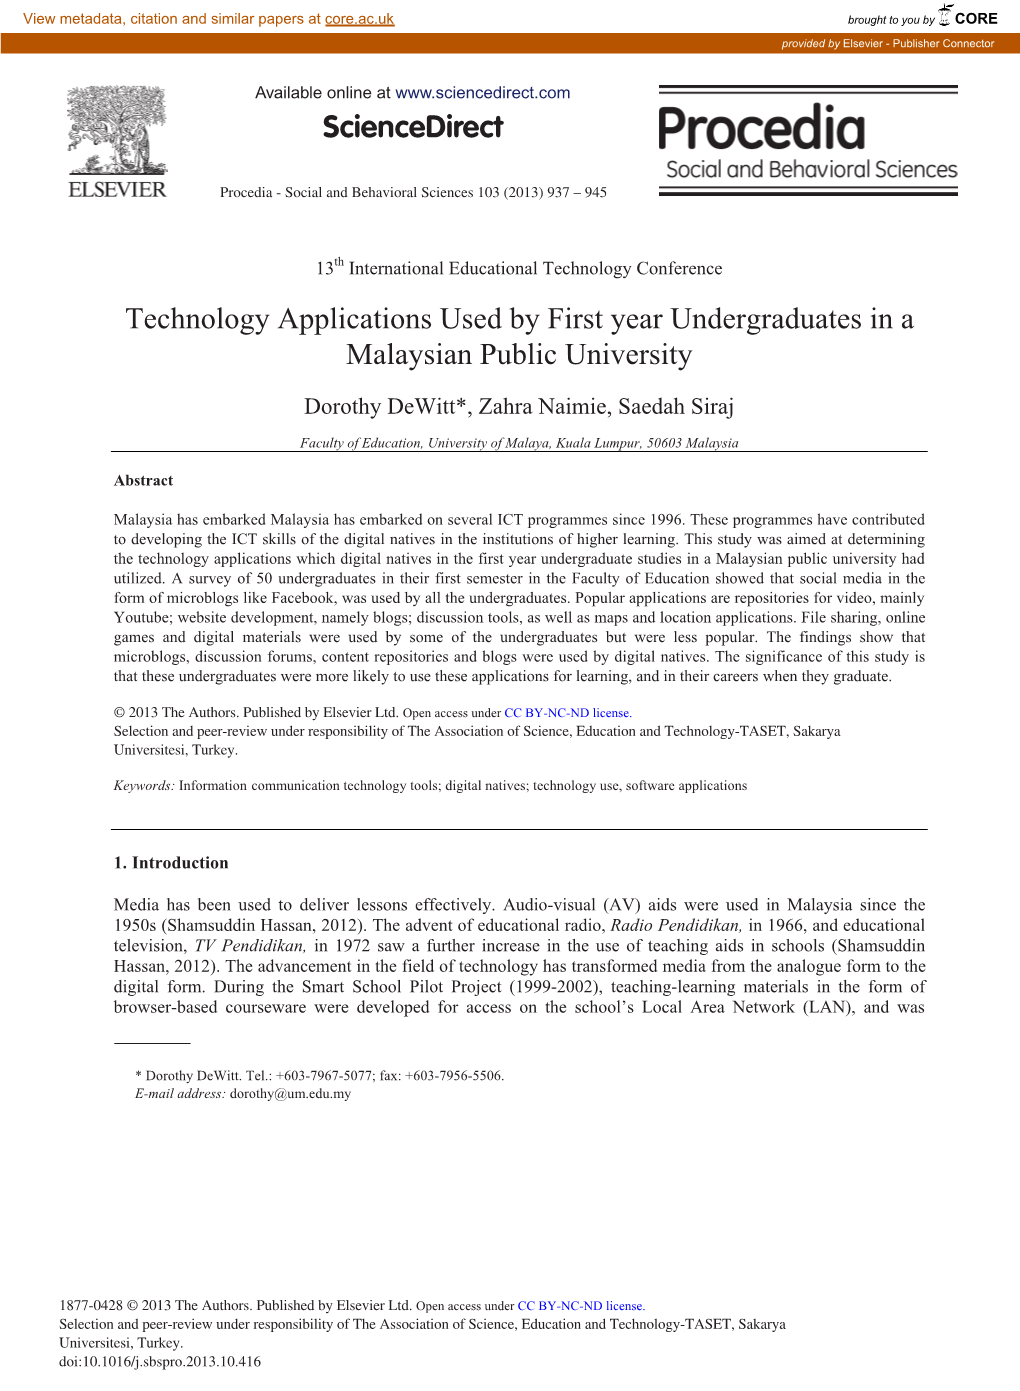 Technology Applications Used by First Year Undergraduates in a Malaysian Public University